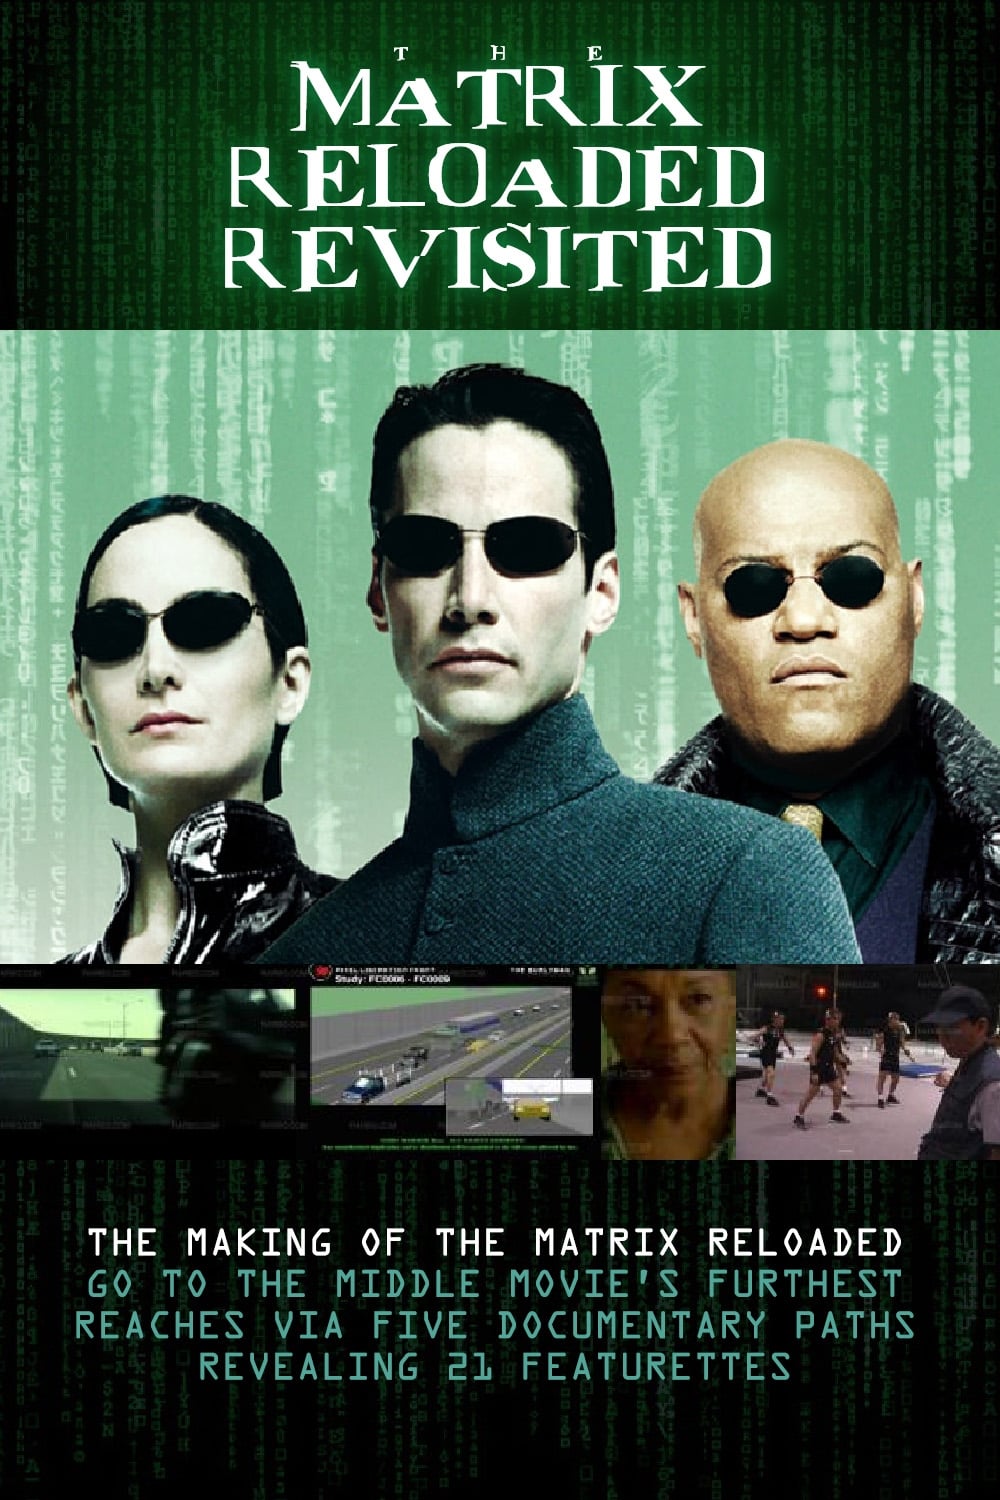 The Matrix Reloaded Revisited 2004 Movie Where To Watch Streaming Online Plot